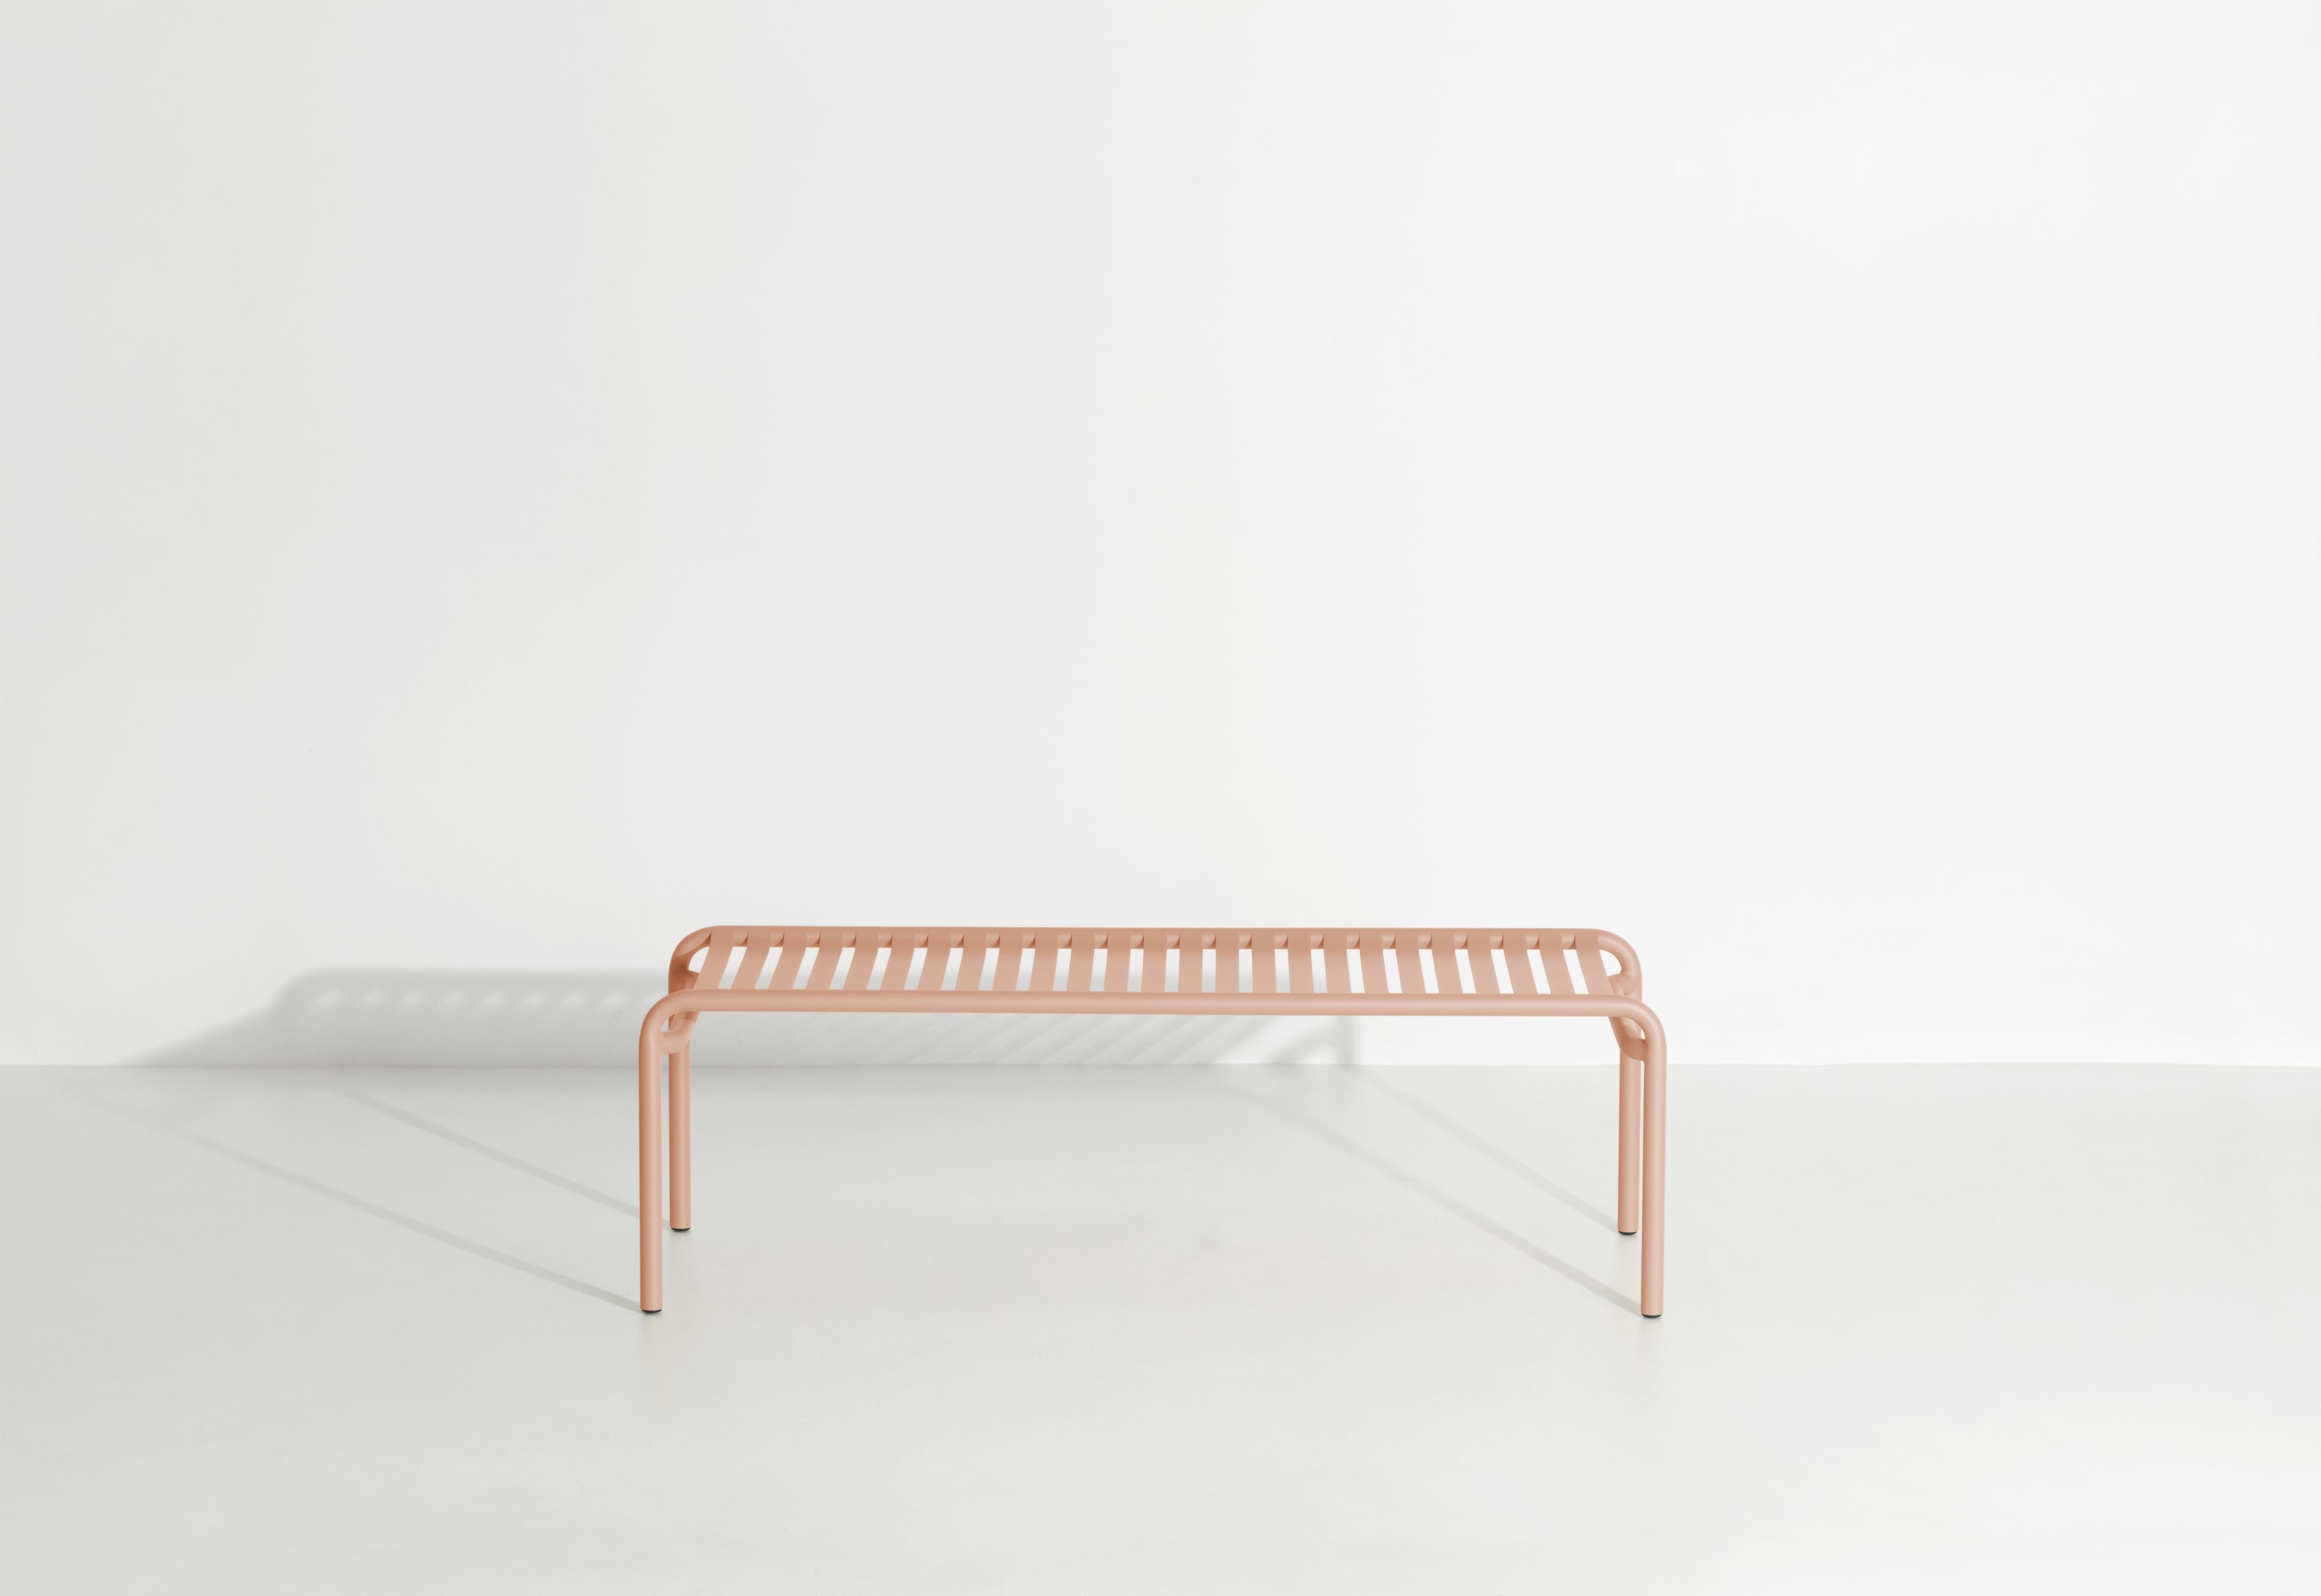 Petite Friture Week-End Long Coffee Table in Blush Aluminium, 2017 In New Condition For Sale In Brooklyn, NY